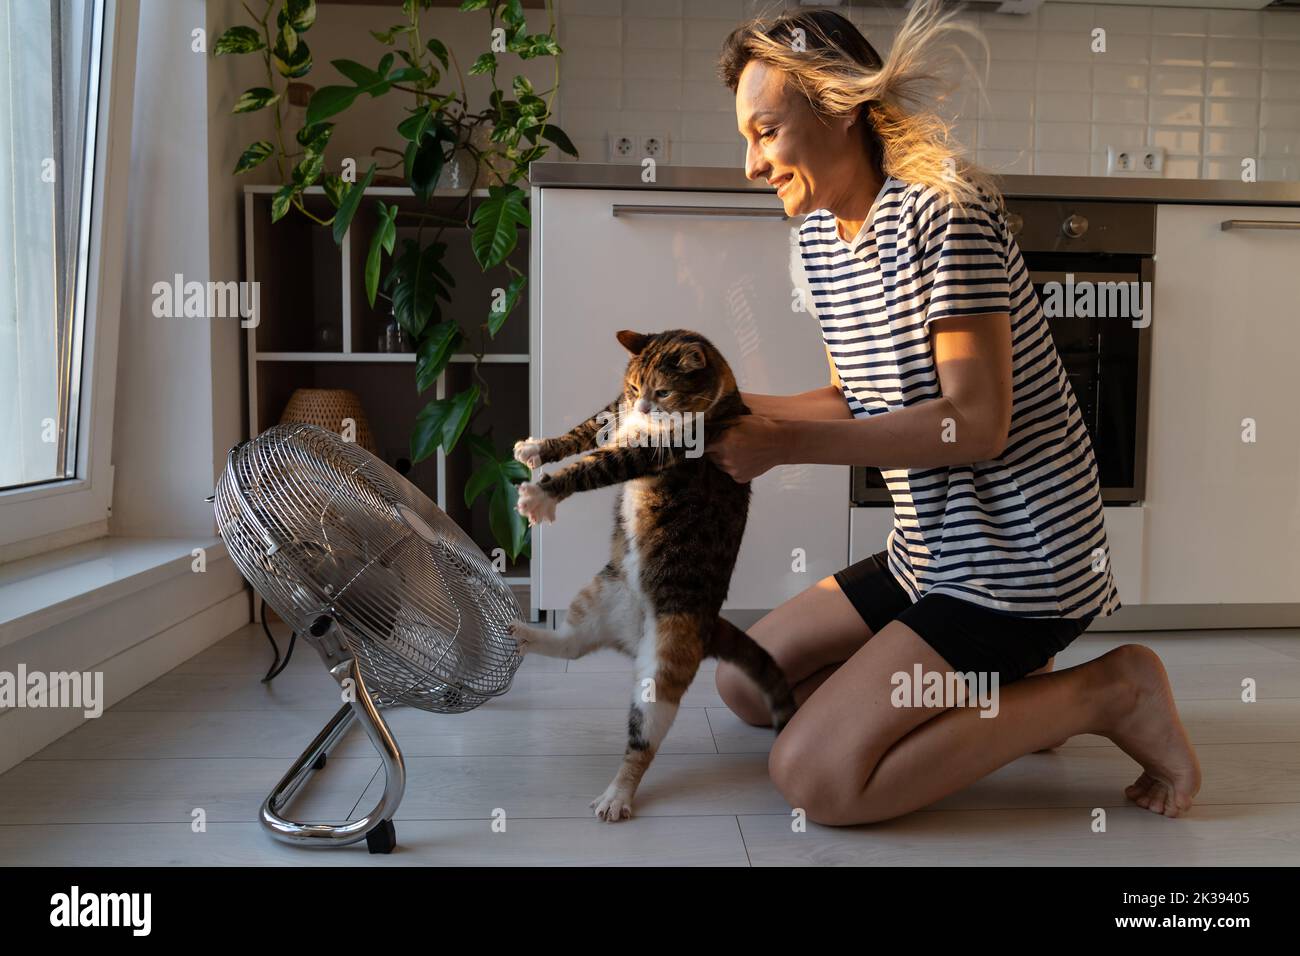 Cat hates stream of cold air and tries to run away from fan and landlady sitting on floor in kitchen Stock Photo